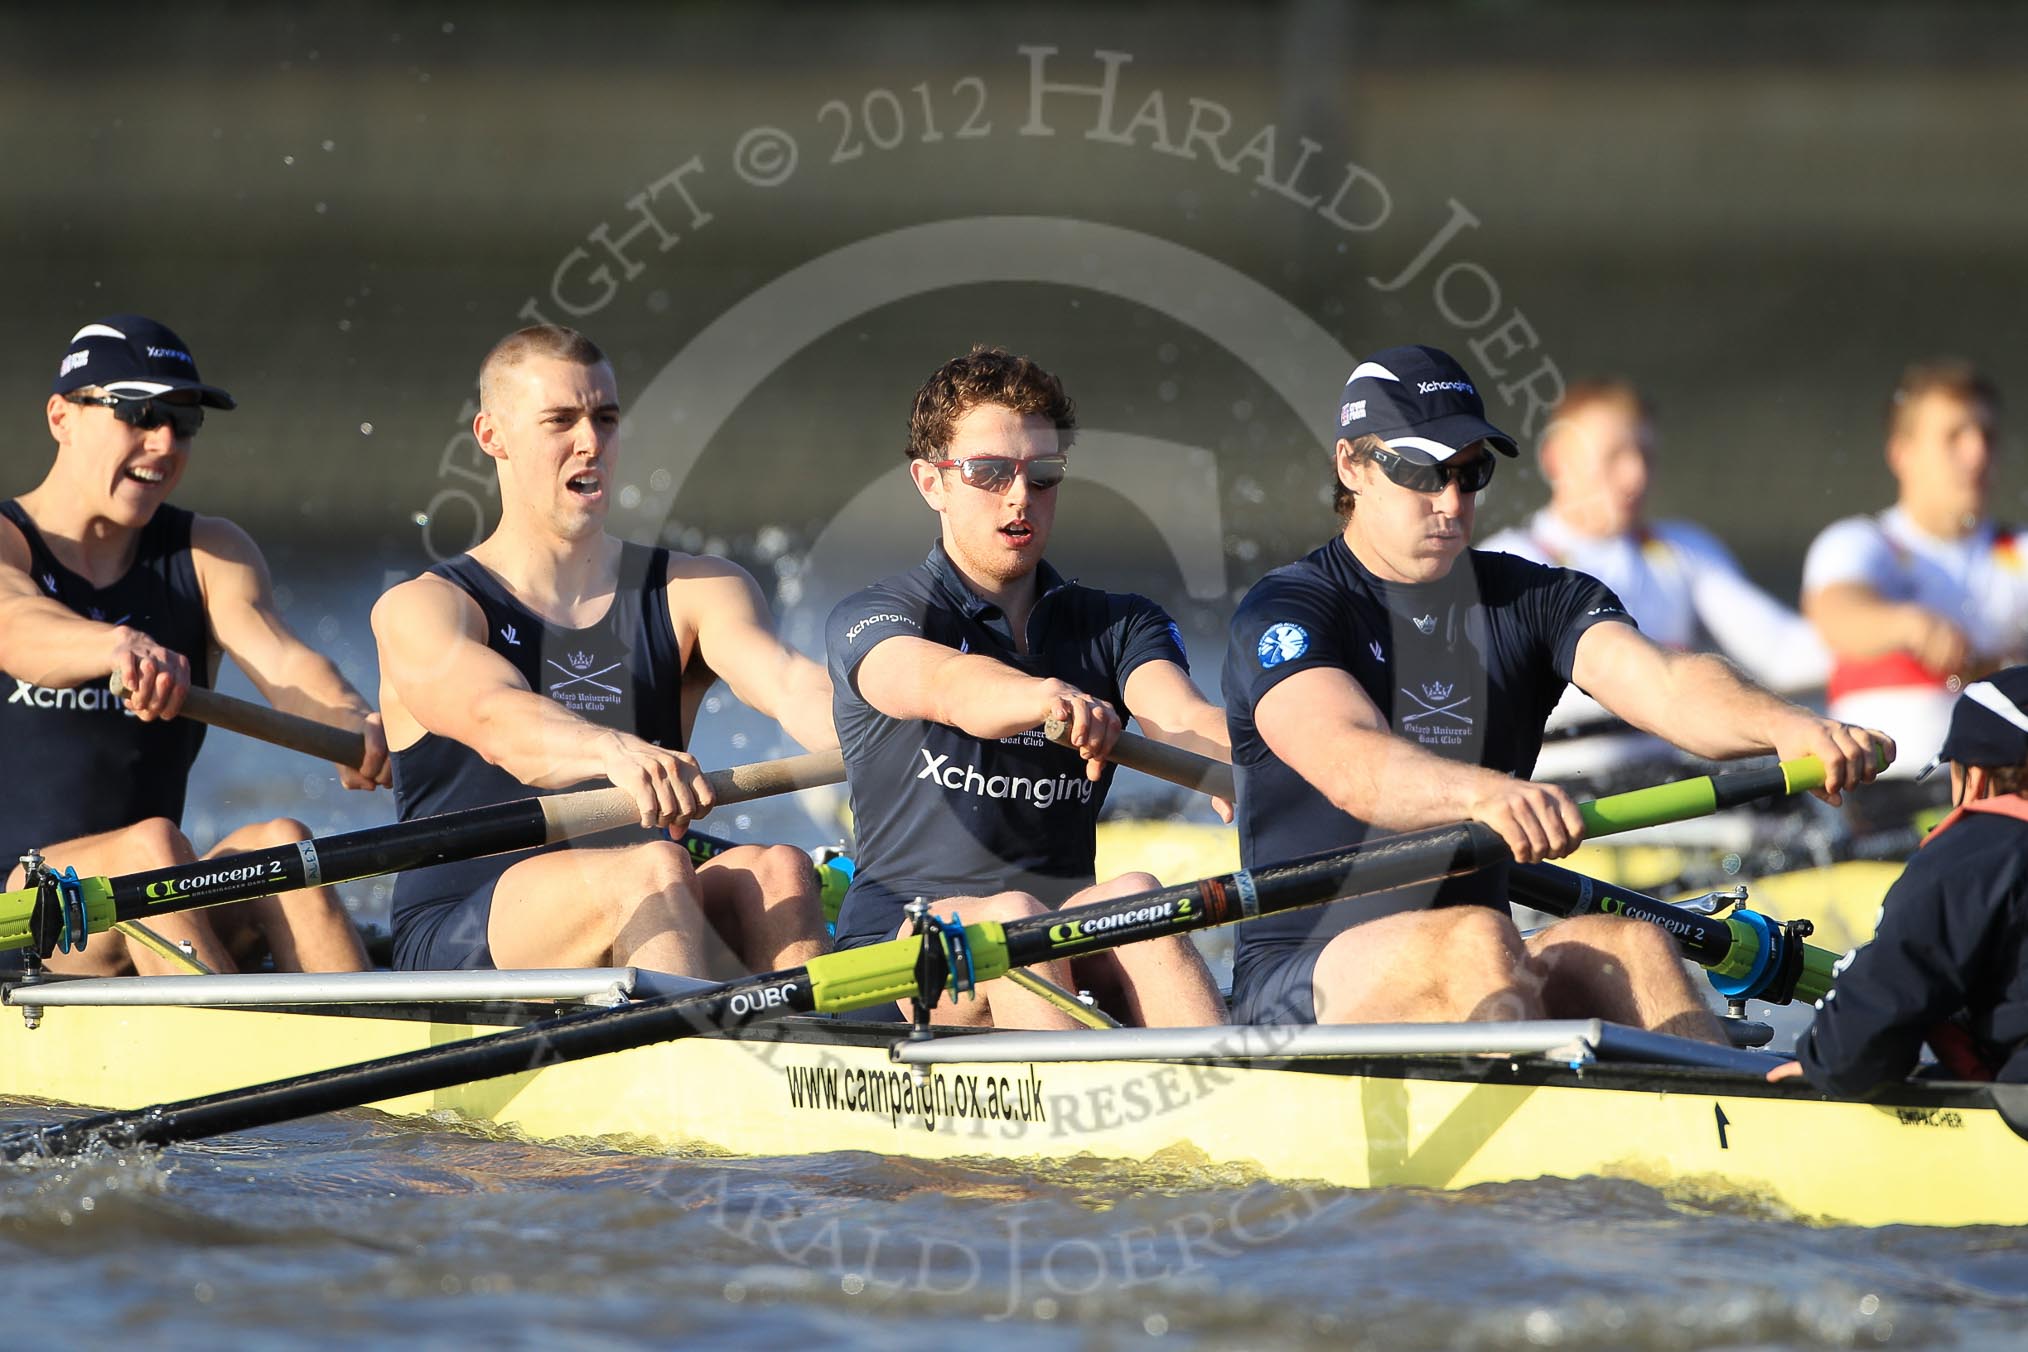 The Boat Race season 2012 - fixture OUBC vs German U23: In front the Oxford Blue Boat, from left to right Karl Hudspith, Alex Davidson, Dan Harvey, Stern Roel Haen, and cox Zoe de Toledo, behind, in the German U23 boat, bow Maximilian Johanning and Rene Stüven..
River Thames between Putney and Mortlake,
London,

United Kingdom,
on 26 February 2012 at 15:26, image #53